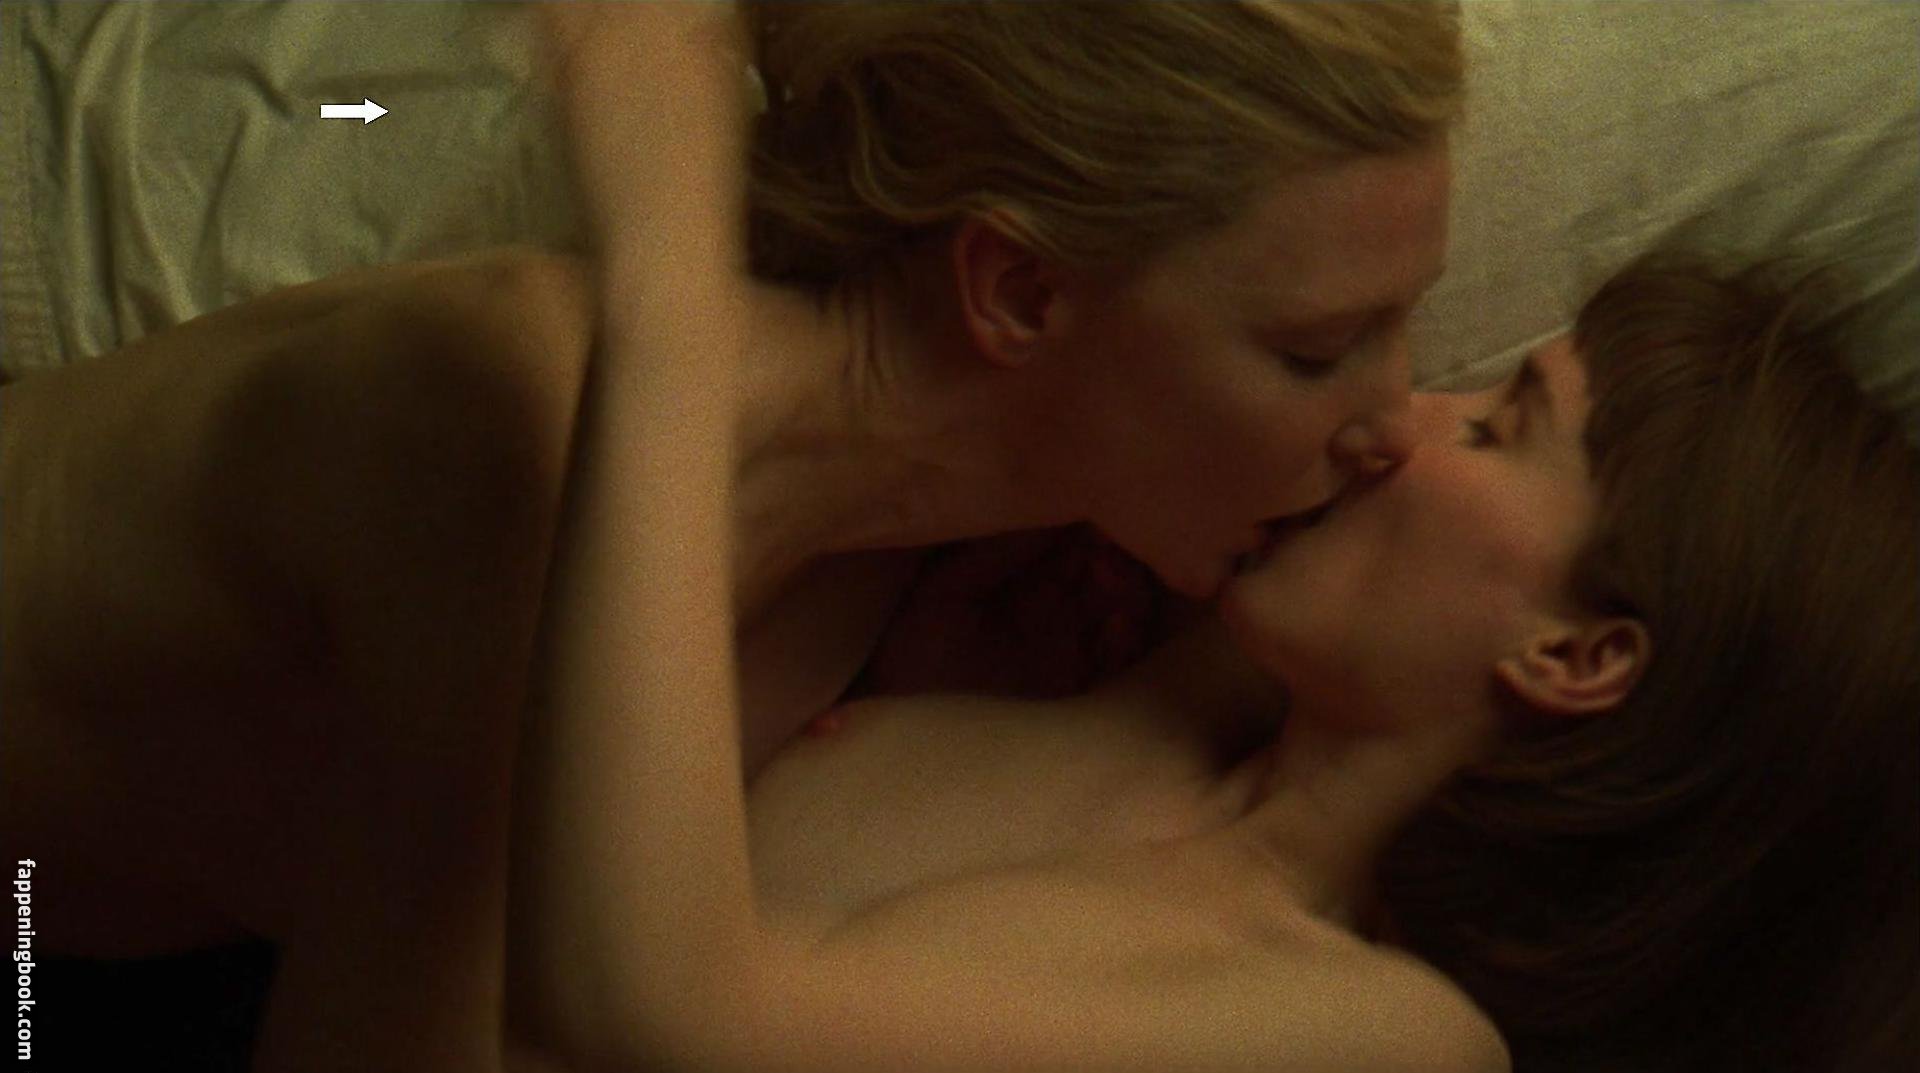 Cate Blanchett Nude, The Fappening - Photo #104915 - FappeningBook.